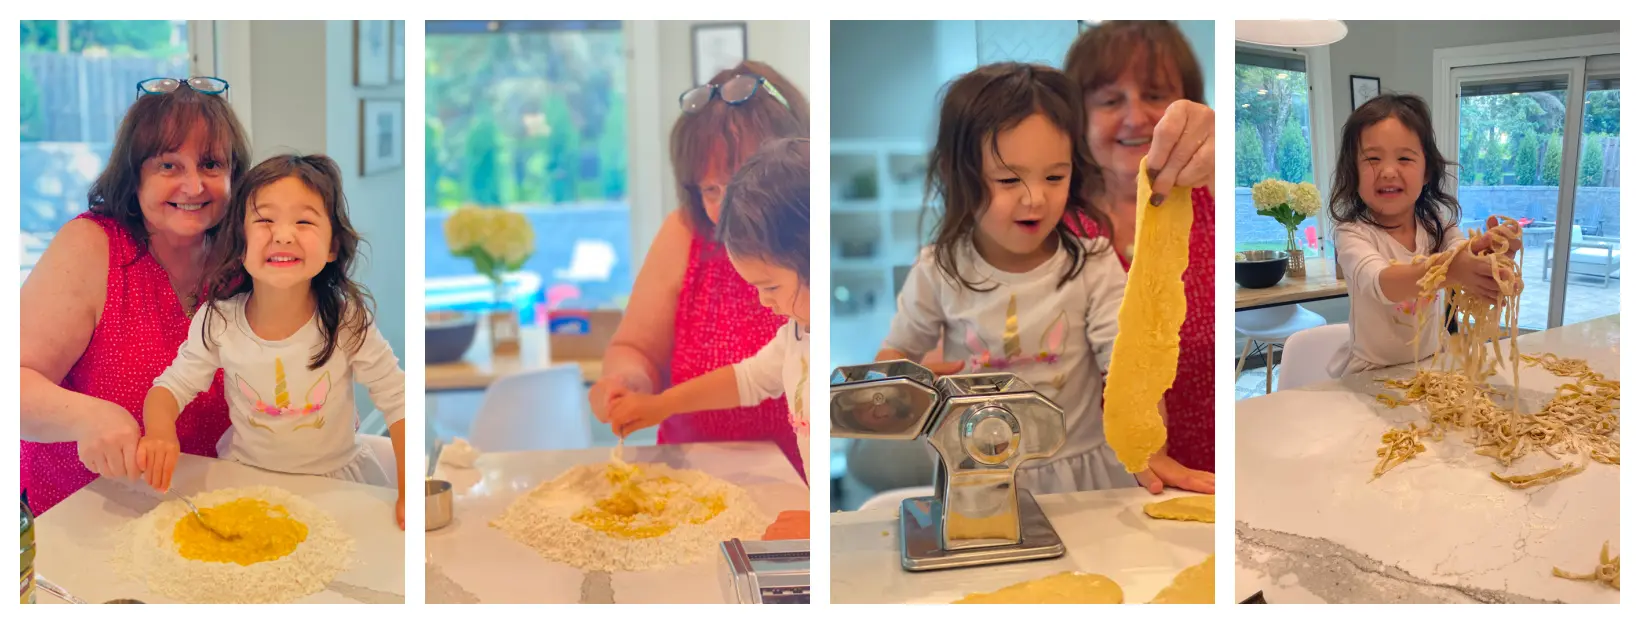 GG and Zoey making homemade pasta together